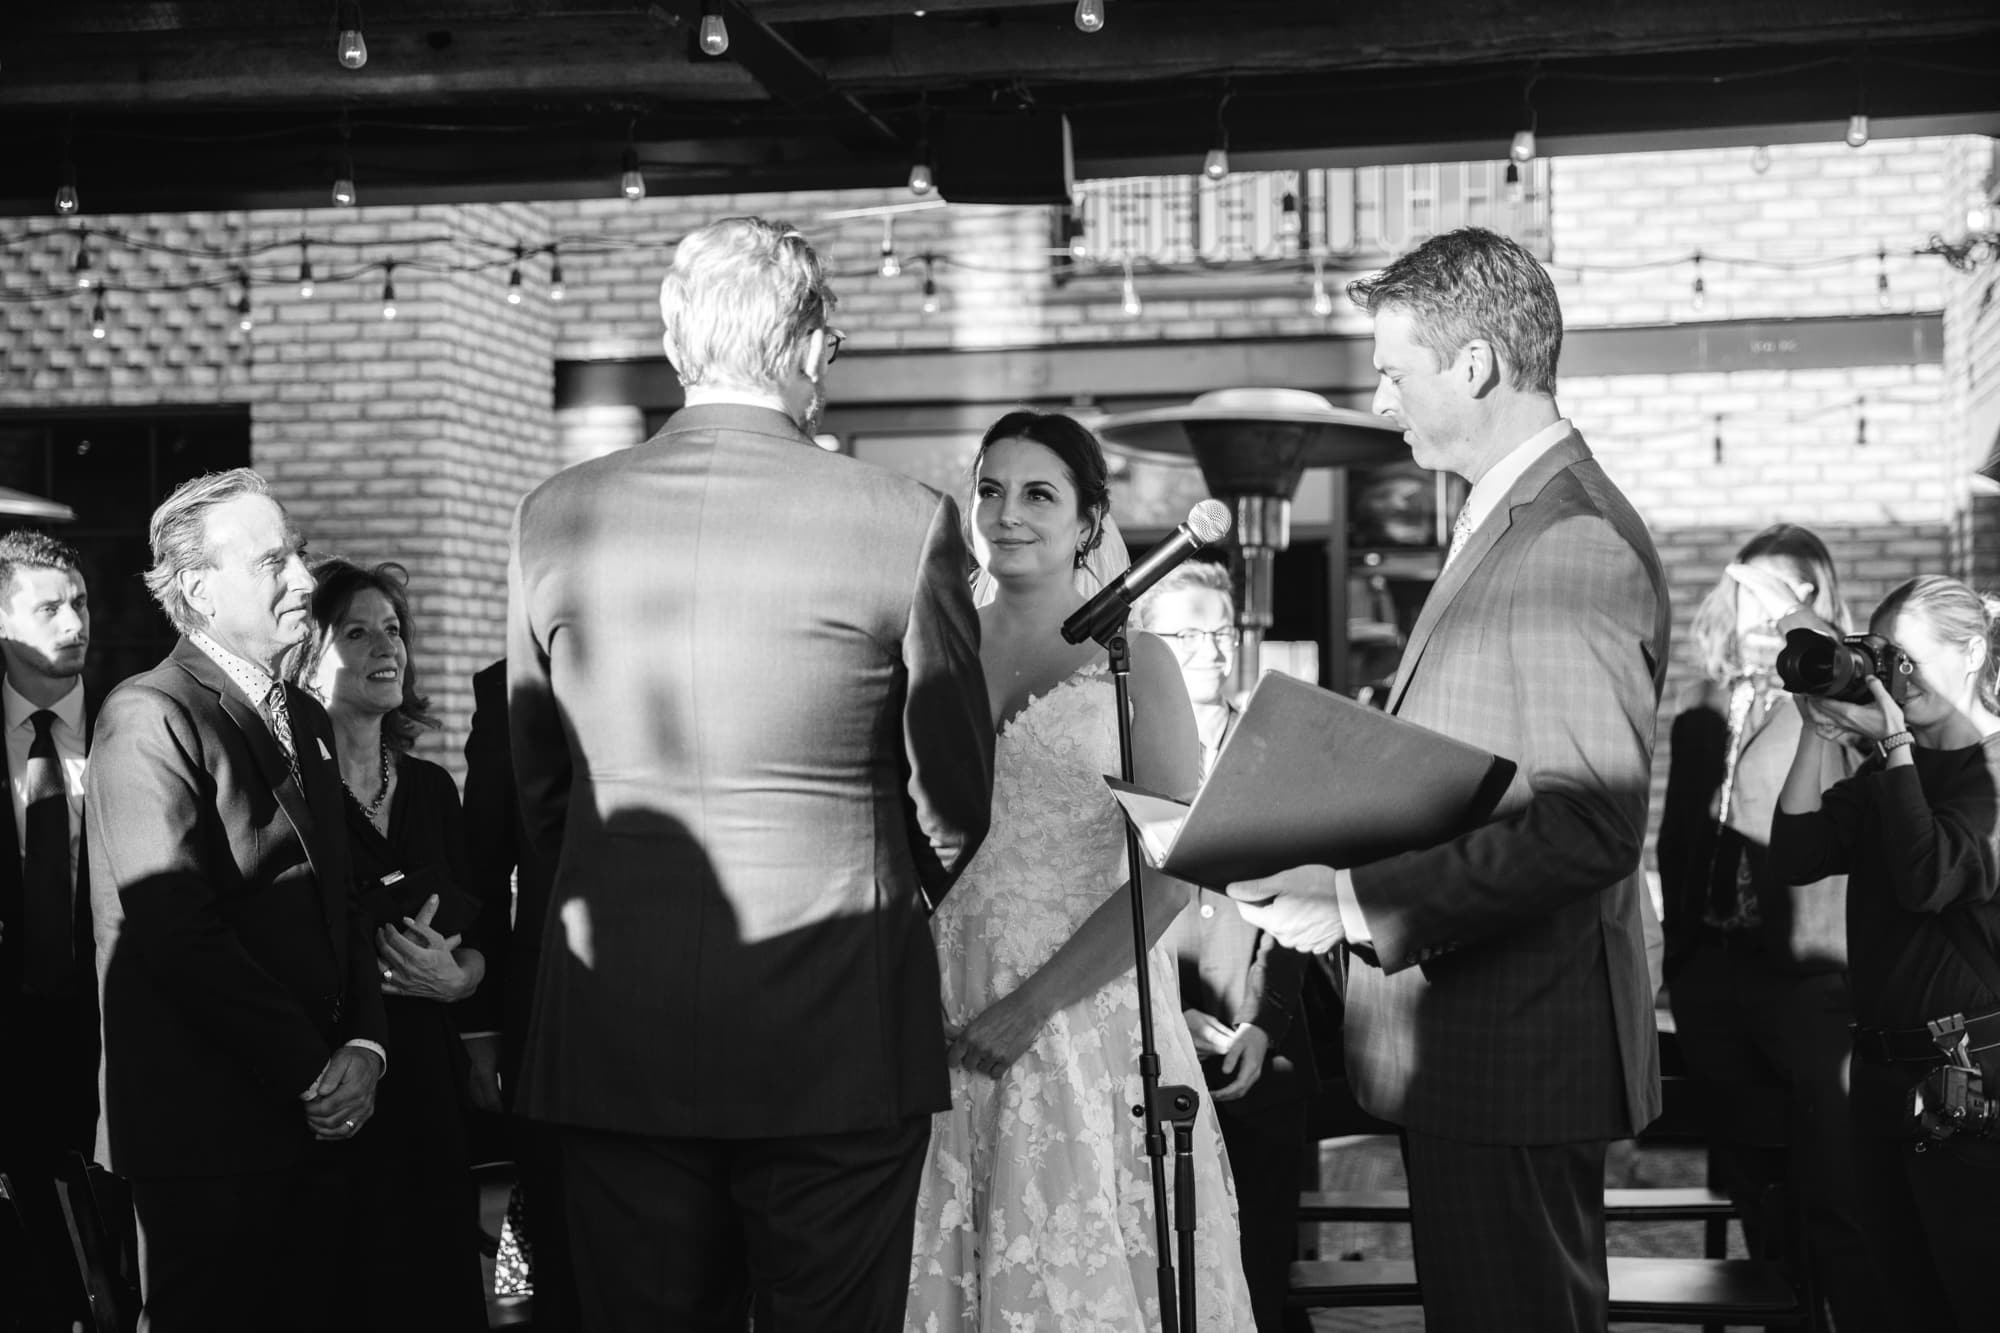 bride and groom, black and white wedding photographer, black and white wedding, wedding ceremony, black and white wedding ceremony, denver wedding photographer